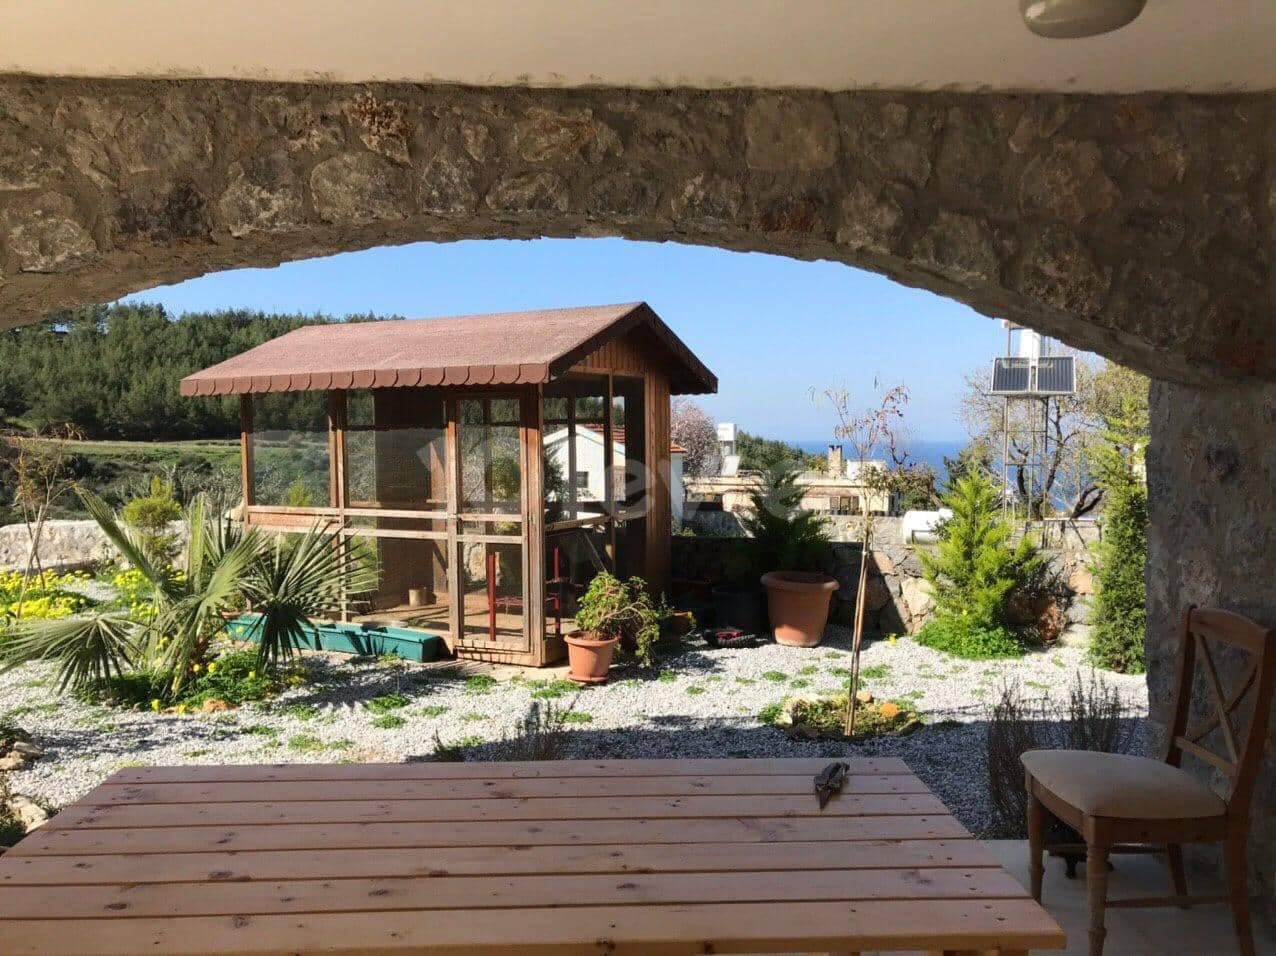 A FULLY FURNISHED 3+1 DUPLEX LUX VILLA WITH A GARDEN WITH A PRIVATE POOL WITH A GREAT VIEW OF NATURE IN THE KYRENIA EDREMIT REGION ** 